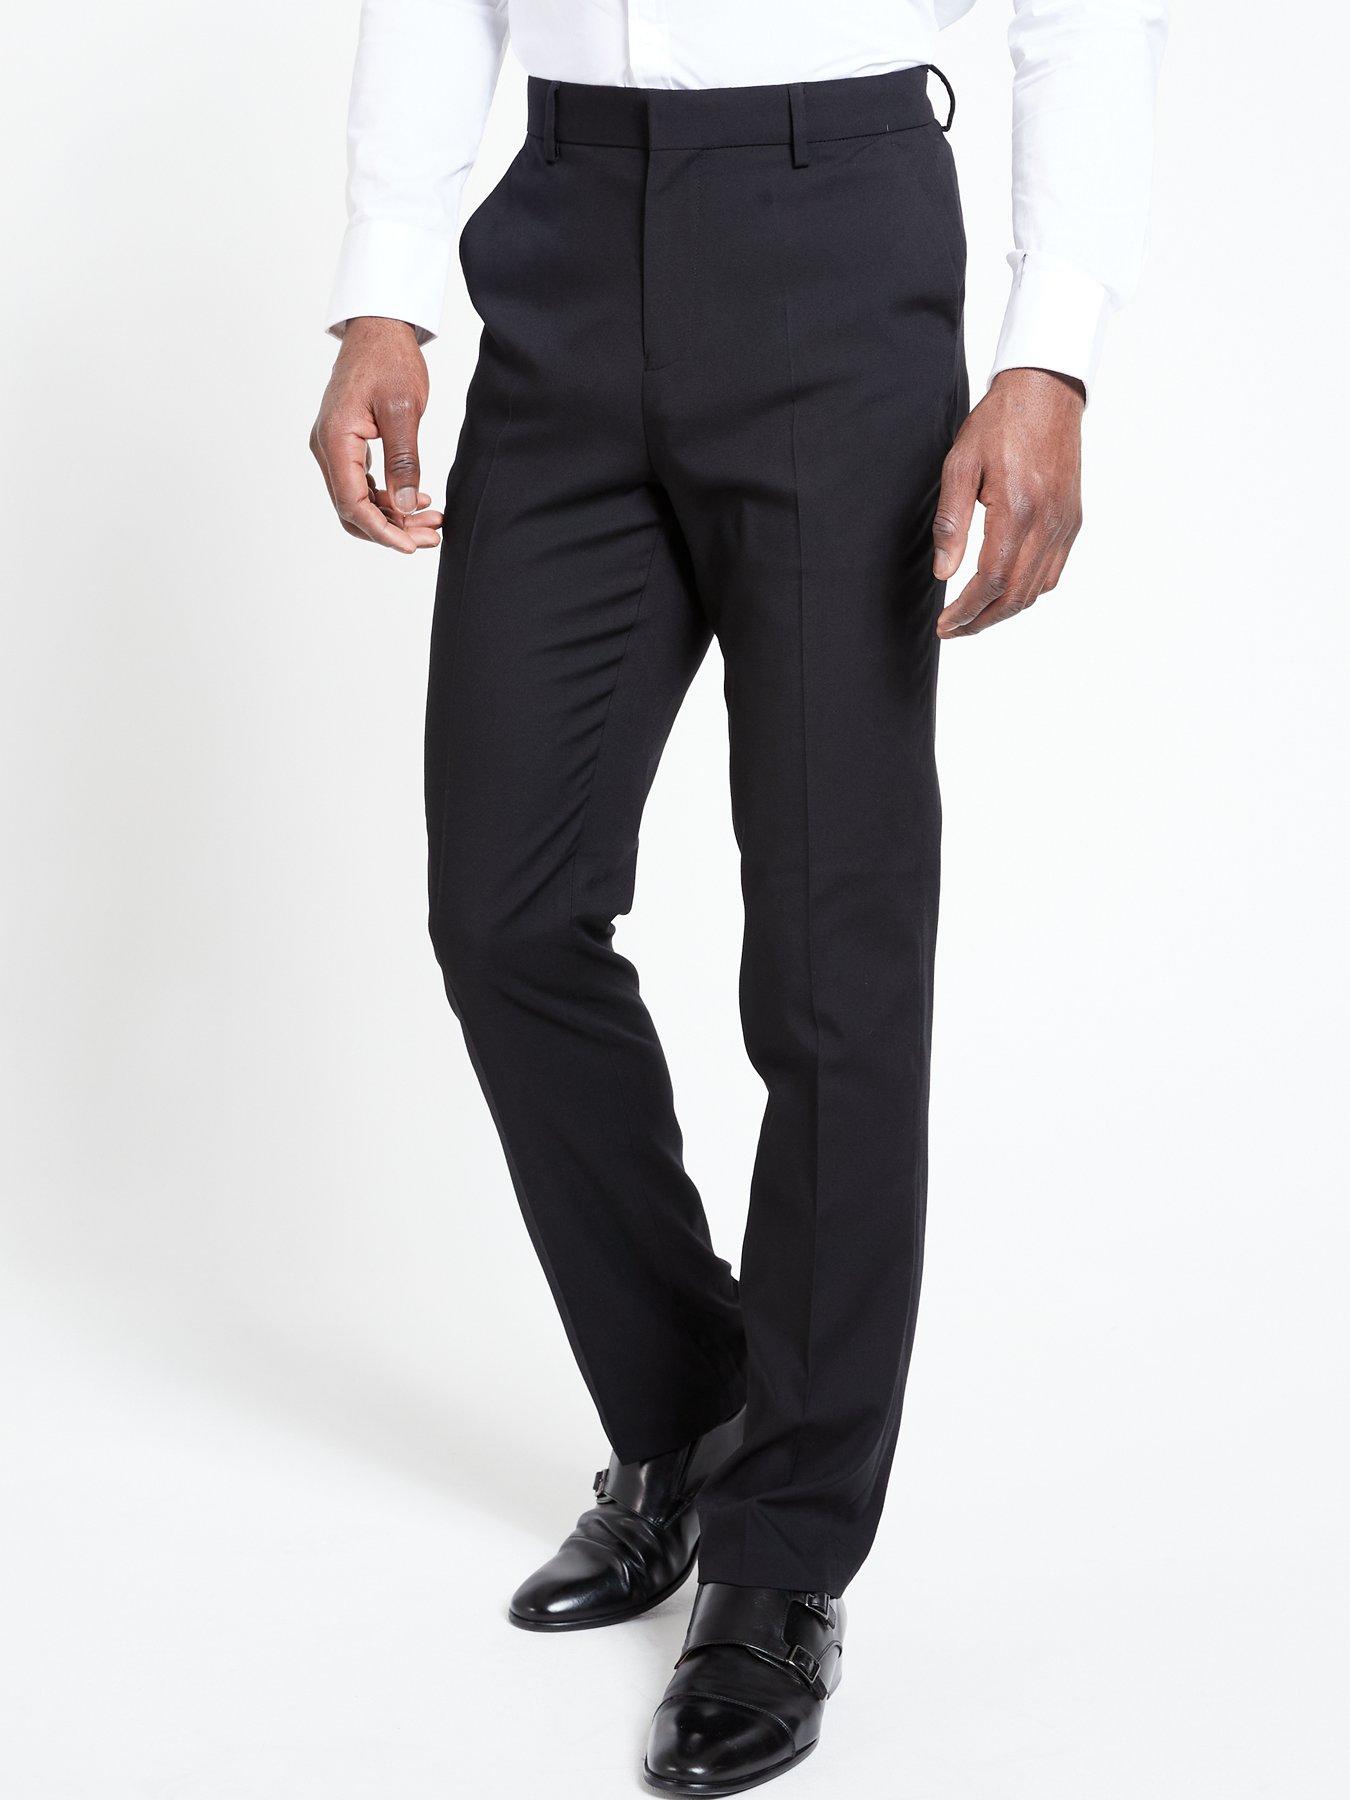 Buy Men's Grey Solid Suit Trouser @Tailorman Custom Made Ready To Wear  Trousers